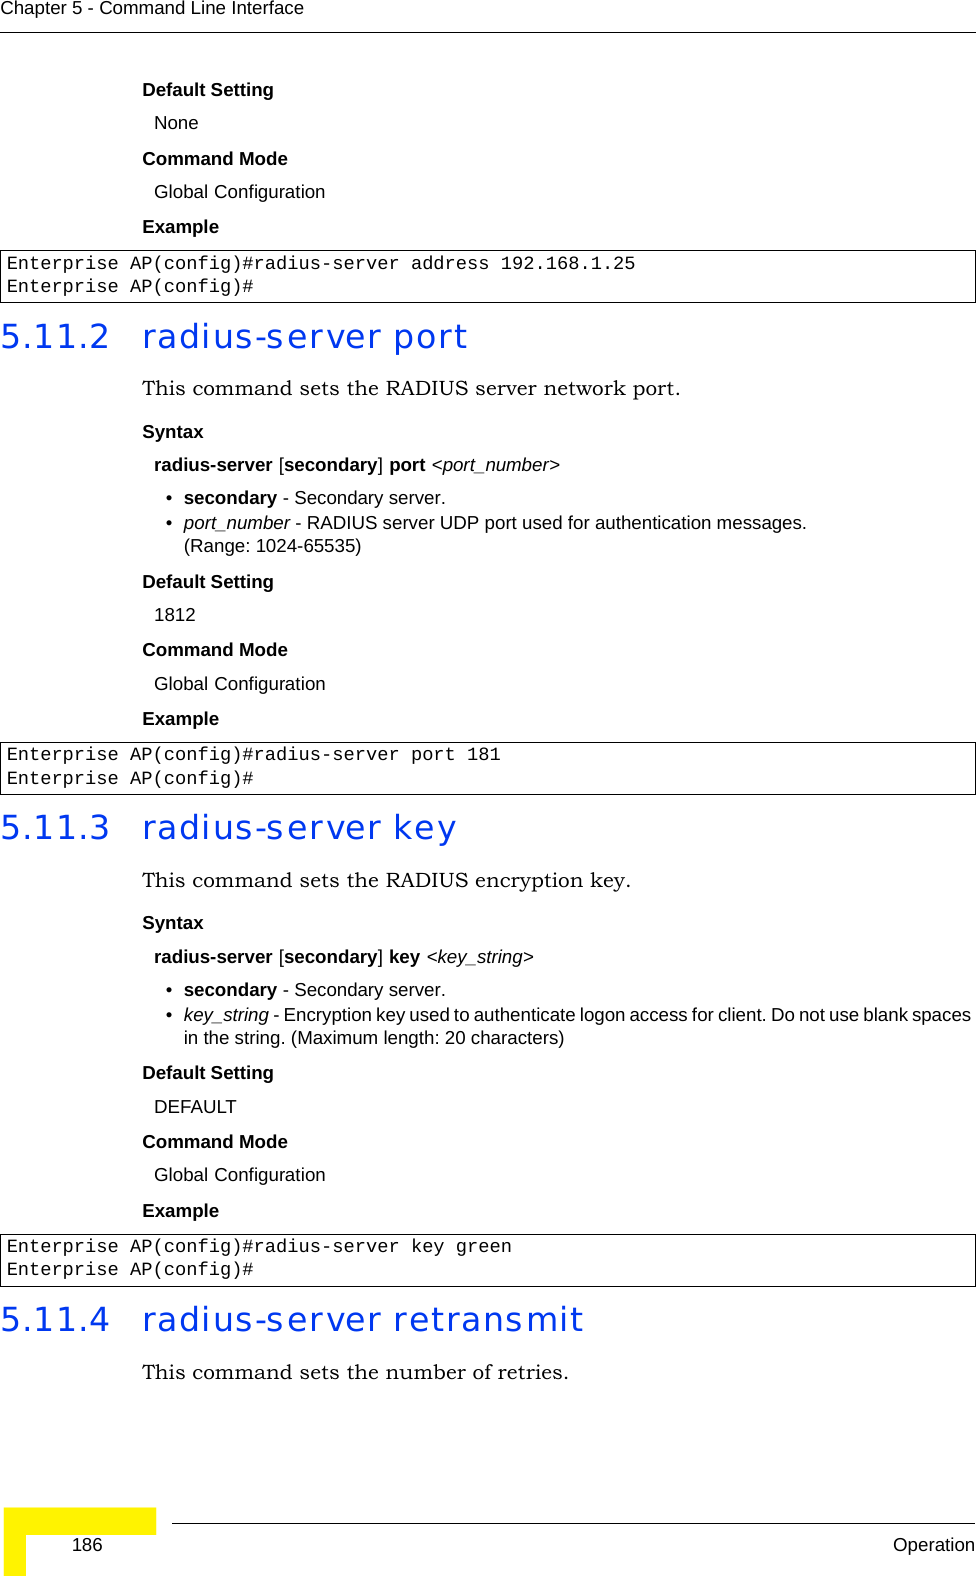  186 OperationChapter 5 - Command Line InterfaceDefault Setting NoneCommand Mode Global ConfigurationExample 5.11.2 radius-server portThis command sets the RADIUS server network port. Syntaxradius-server [secondary] port &lt;port_number&gt;•secondary - Secondary server.•port_number - RADIUS server UDP port used for authentication messages. (Range: 1024-65535)Default Setting 1812Command Mode Global ConfigurationExample 5.11.3 radius-server keyThis command sets the RADIUS encryption key. Syntax radius-server [secondary] key &lt;key_string&gt;•secondary - Secondary server.•key_string - Encryption key used to authenticate logon access for client. Do not use blank spaces in the string. (Maximum length: 20 characters)Default Setting DEFAULTCommand Mode Global ConfigurationExample 5.11.4 radius-server retransmitThis command sets the number of retries. Enterprise AP(config)#radius-server address 192.168.1.25Enterprise AP(config)#Enterprise AP(config)#radius-server port 181Enterprise AP(config)#Enterprise AP(config)#radius-server key greenEnterprise AP(config)#